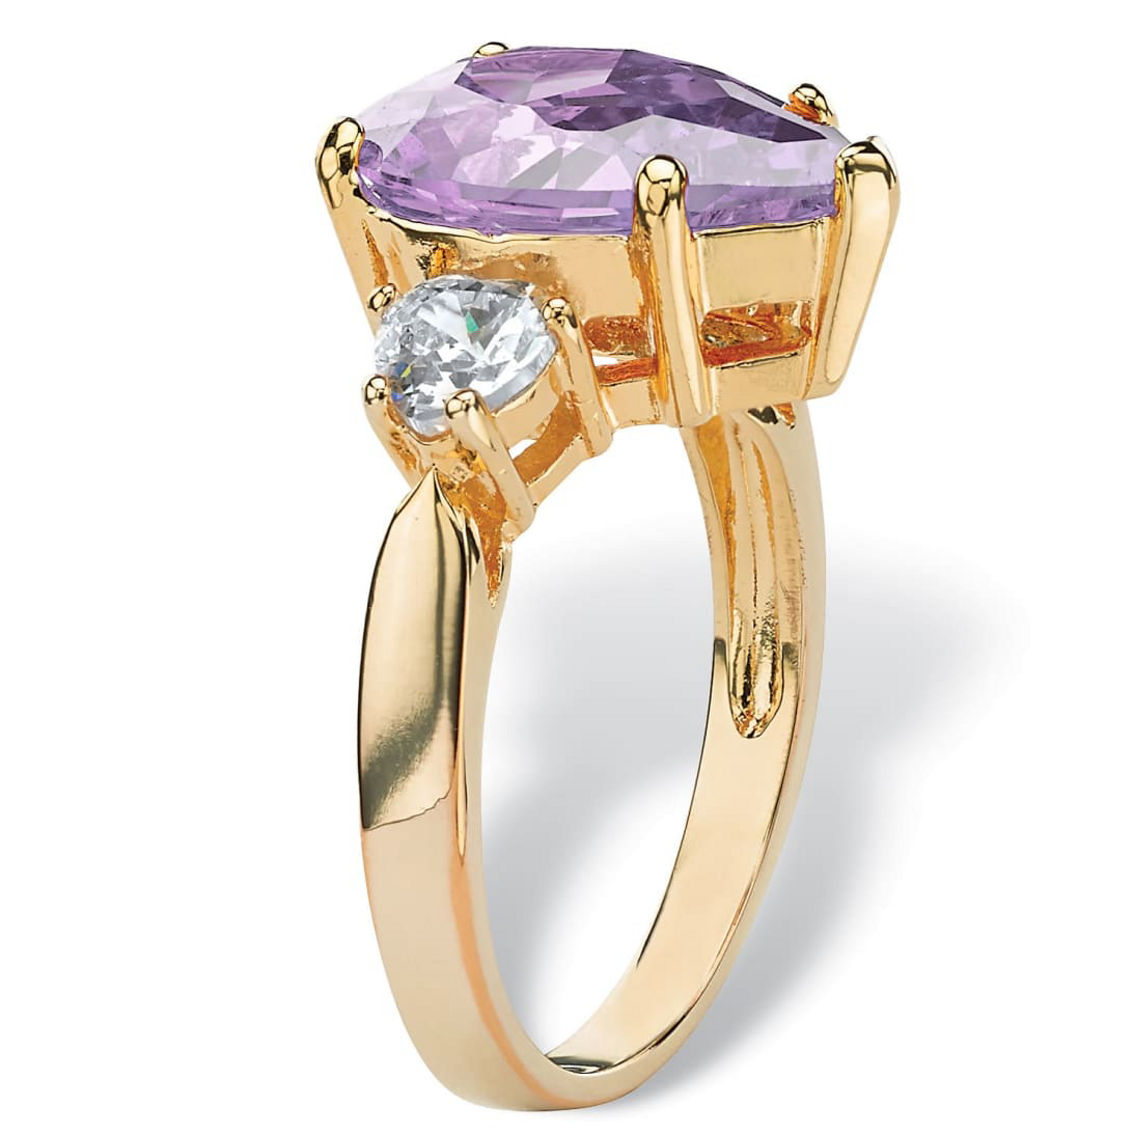 PalmBeach 6.41TCW Purple Pear-Shaped Cubic Zirconia Ring Yellow Gold-Plated - Image 2 of 5